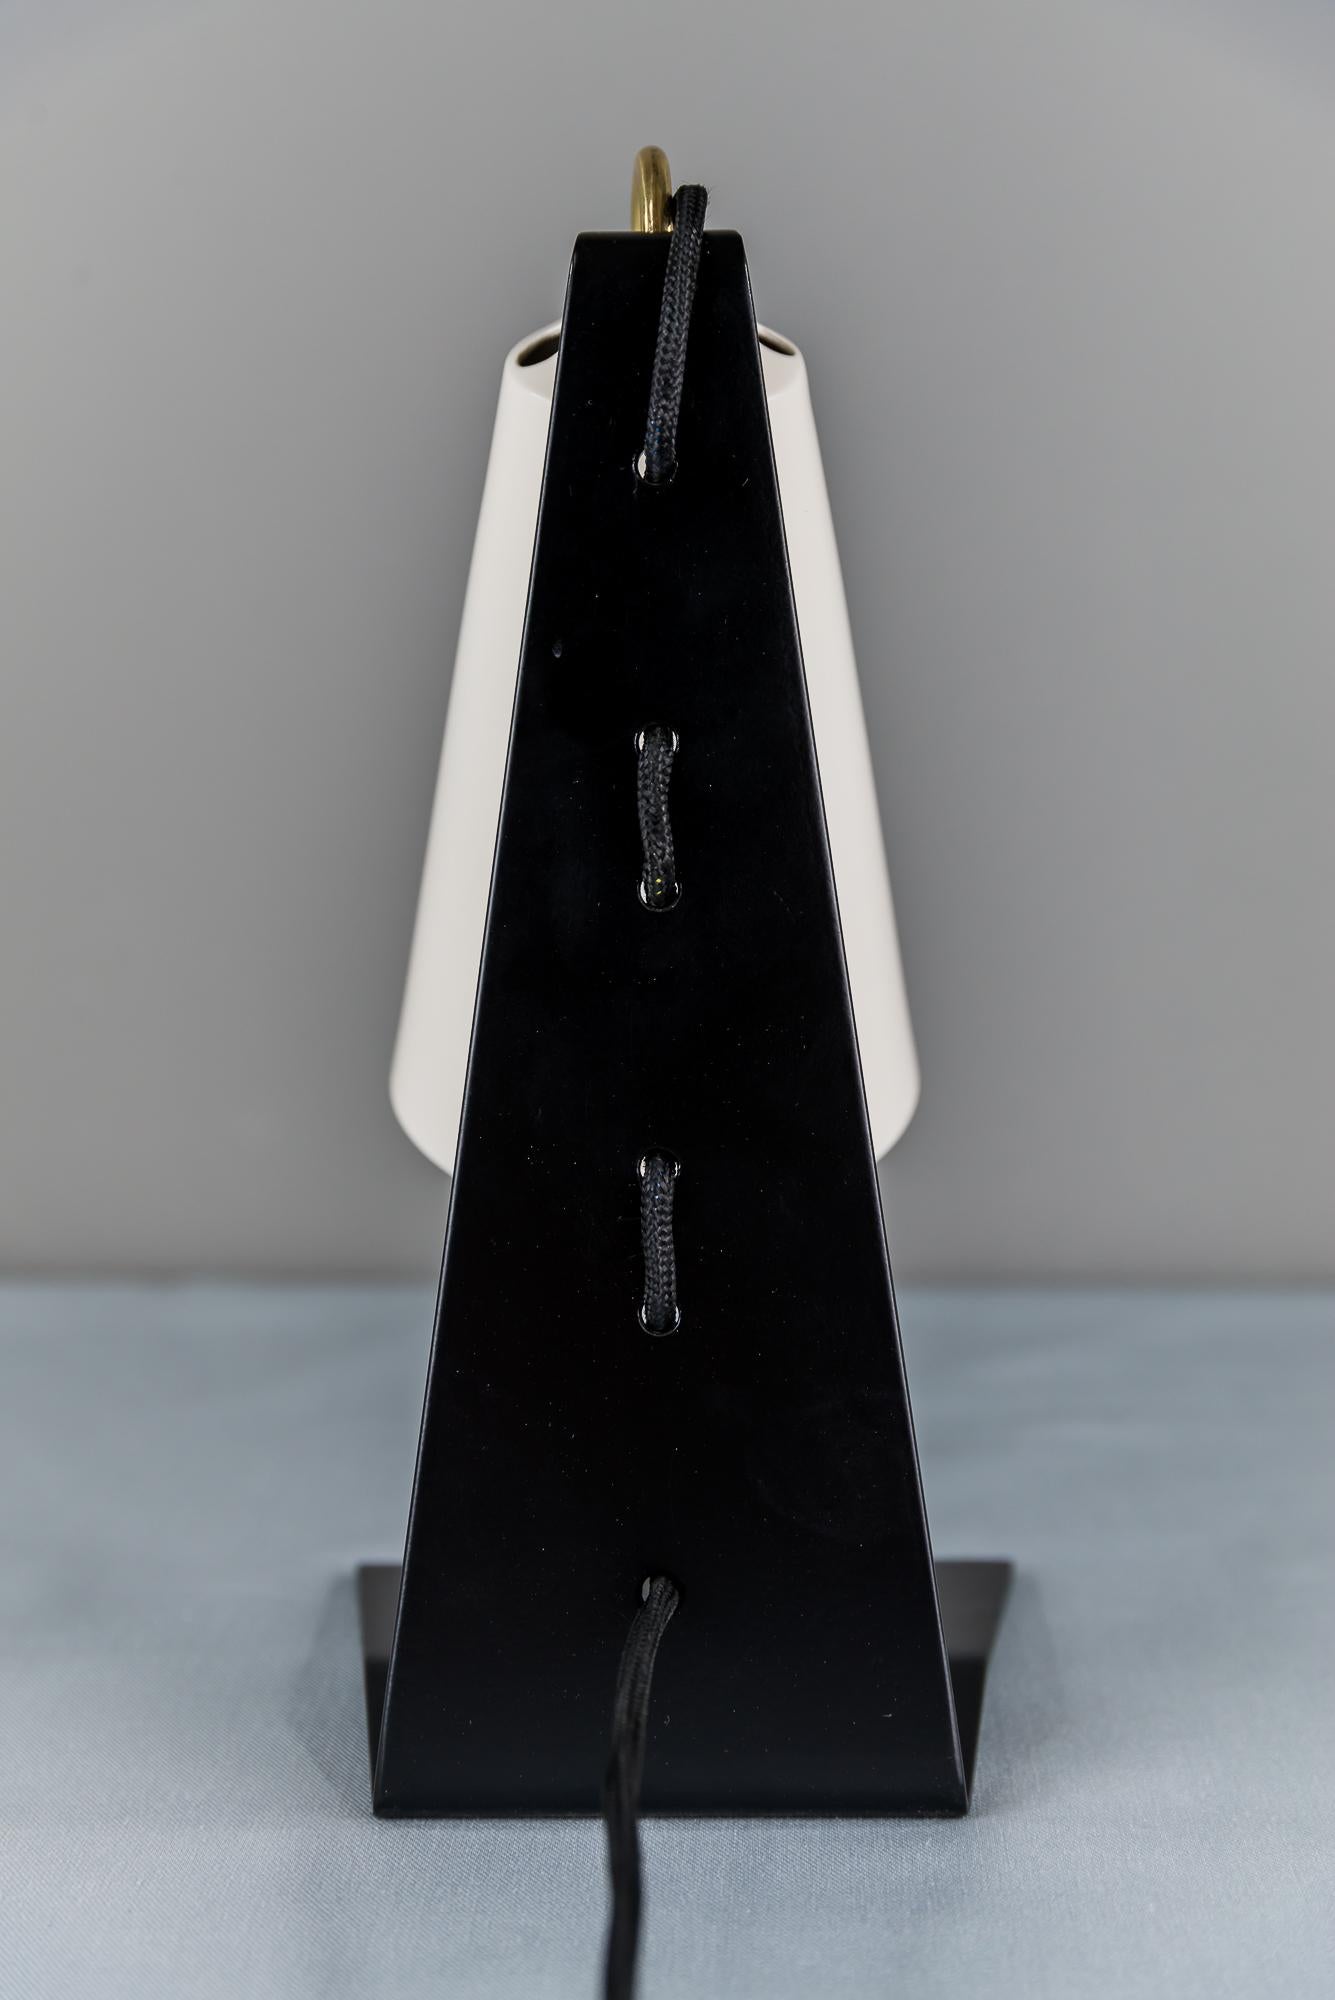 Black and White Austrian Modernist Metall Table Lamp Hook by J. T. Kalmar 1960s For Sale 4